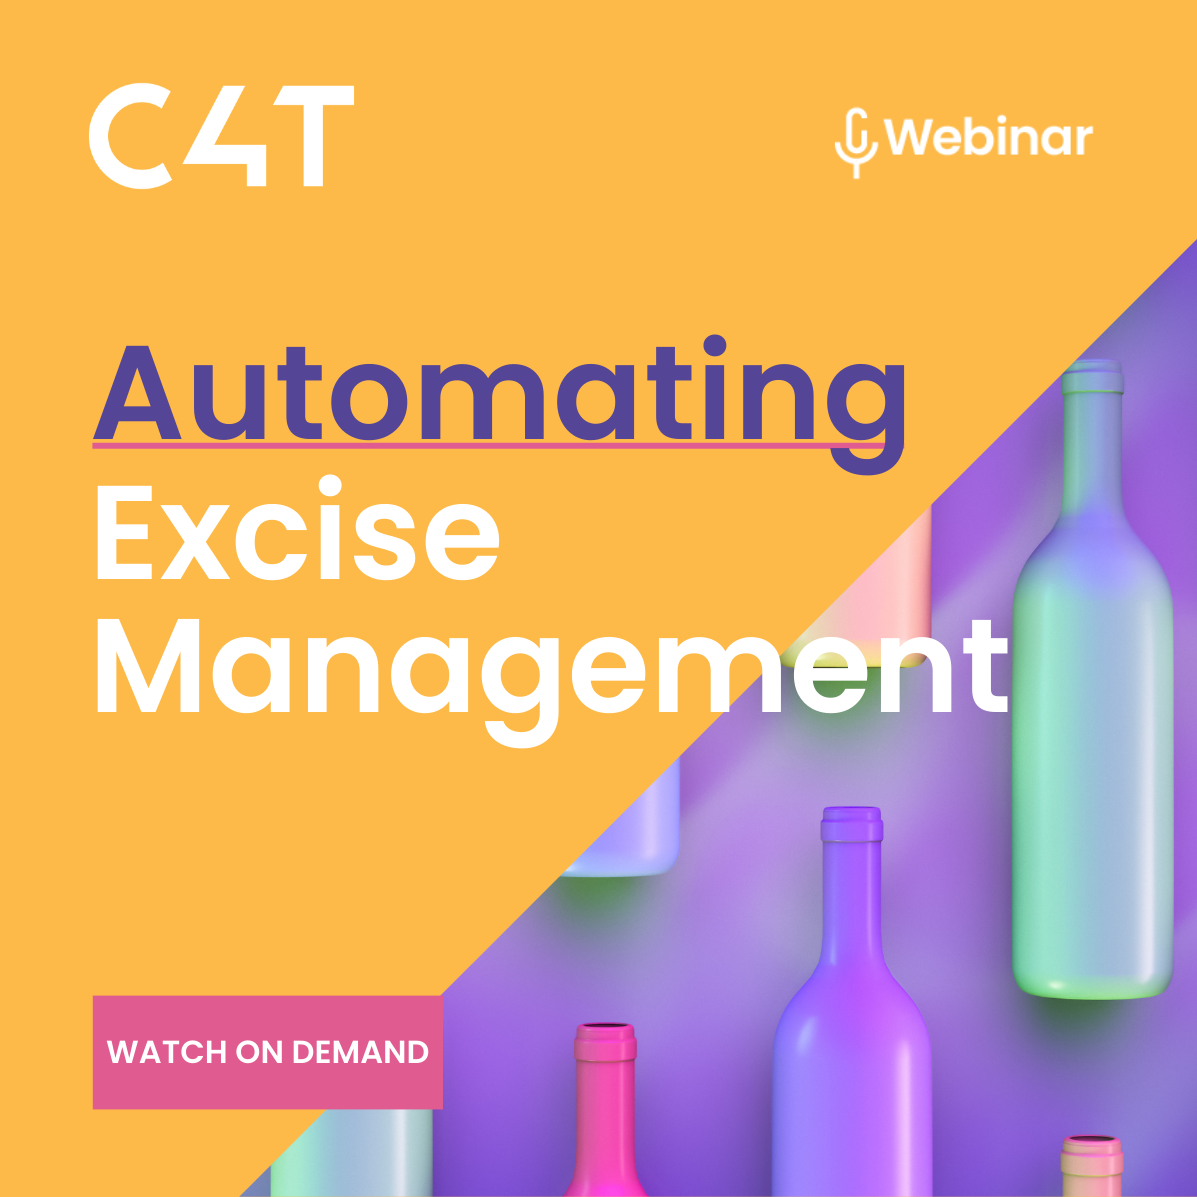 Automating Excise Webinar Email Social Post on demand